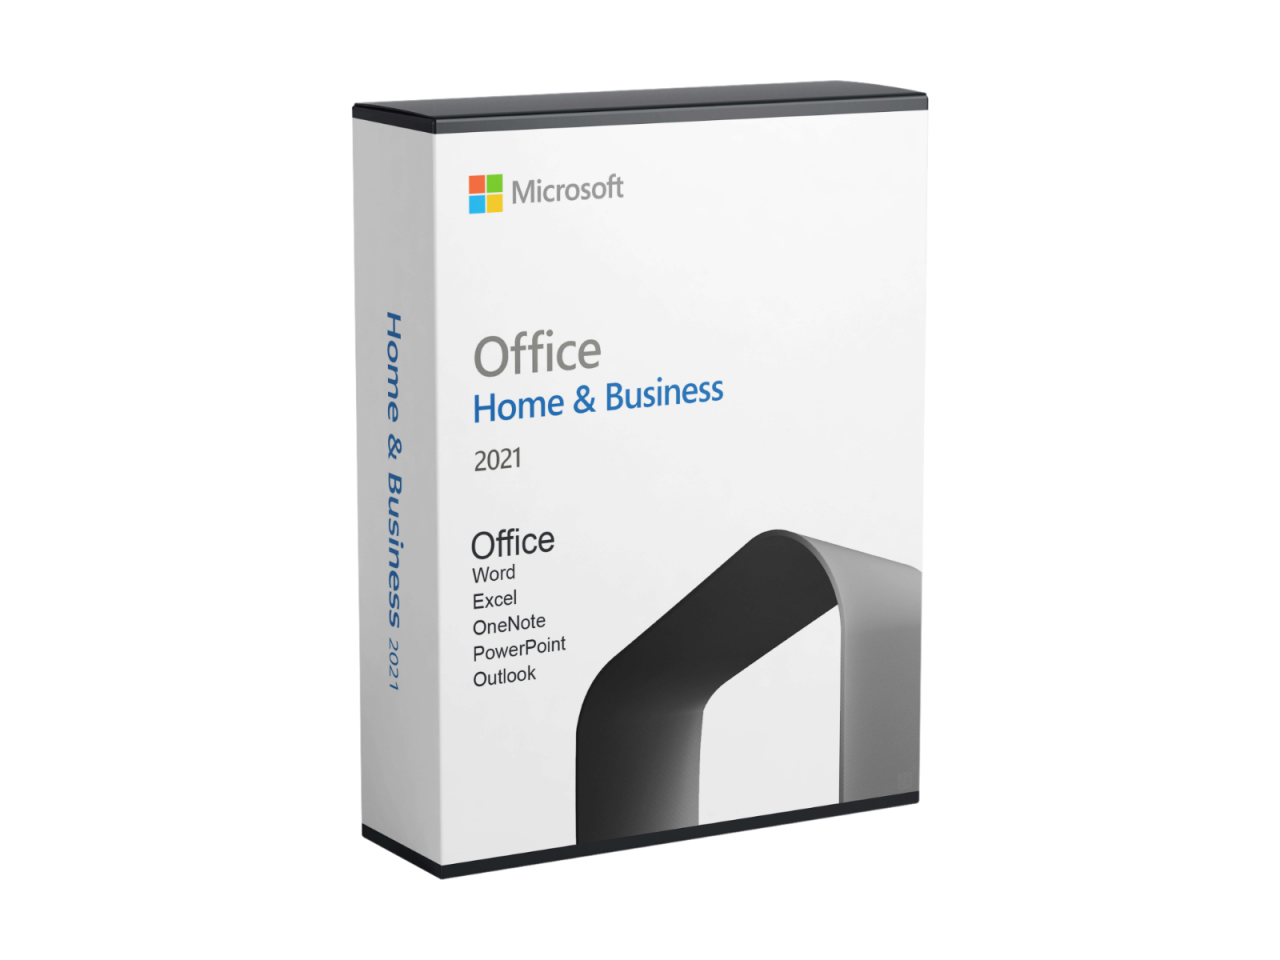 Лицензия офис 2021. Office 2021 Home and student ключ. Office 2021 Home and Business. Microsoft Office 2021 Home and Business для Mac. Лицензия Office 2021 Home and Business Box.